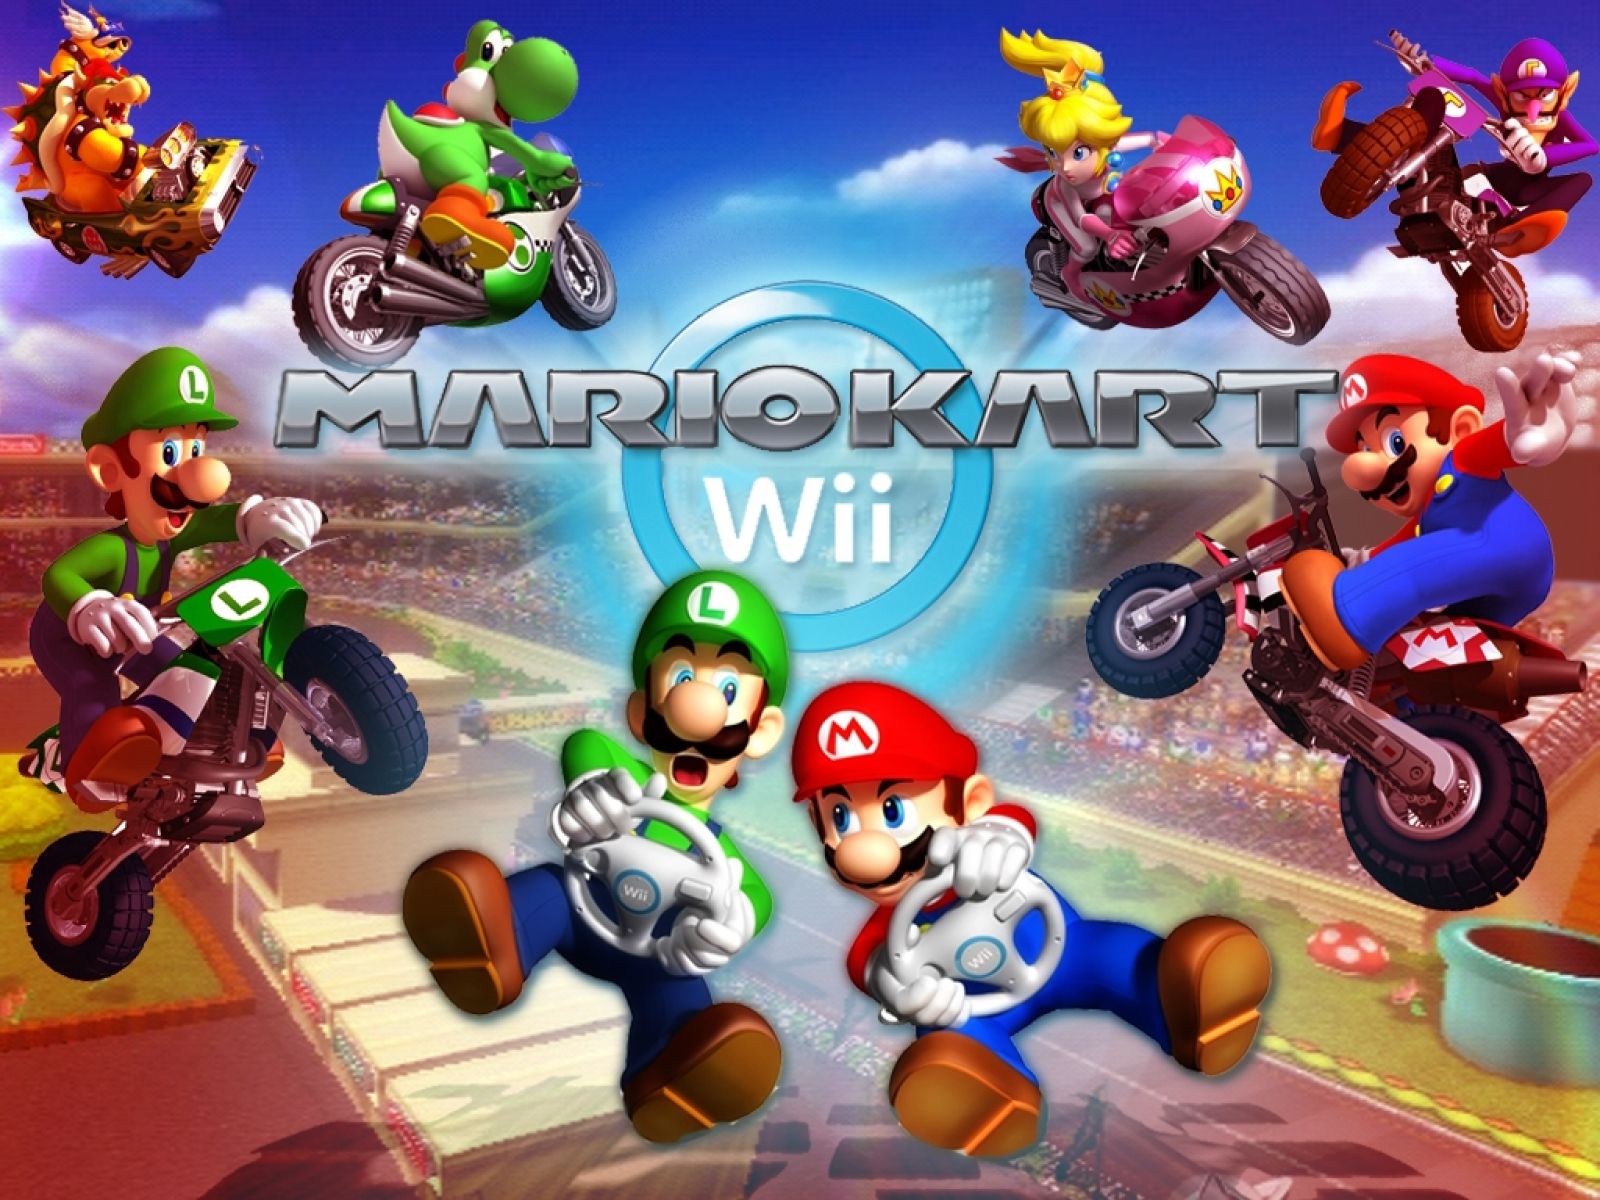 Download Wallpaper, Download 1600x1200 Awesome Cool Mario Kart Wii Wallpaper –Free Wallpaper Download. Mario kart, Mario kart wii, Mario